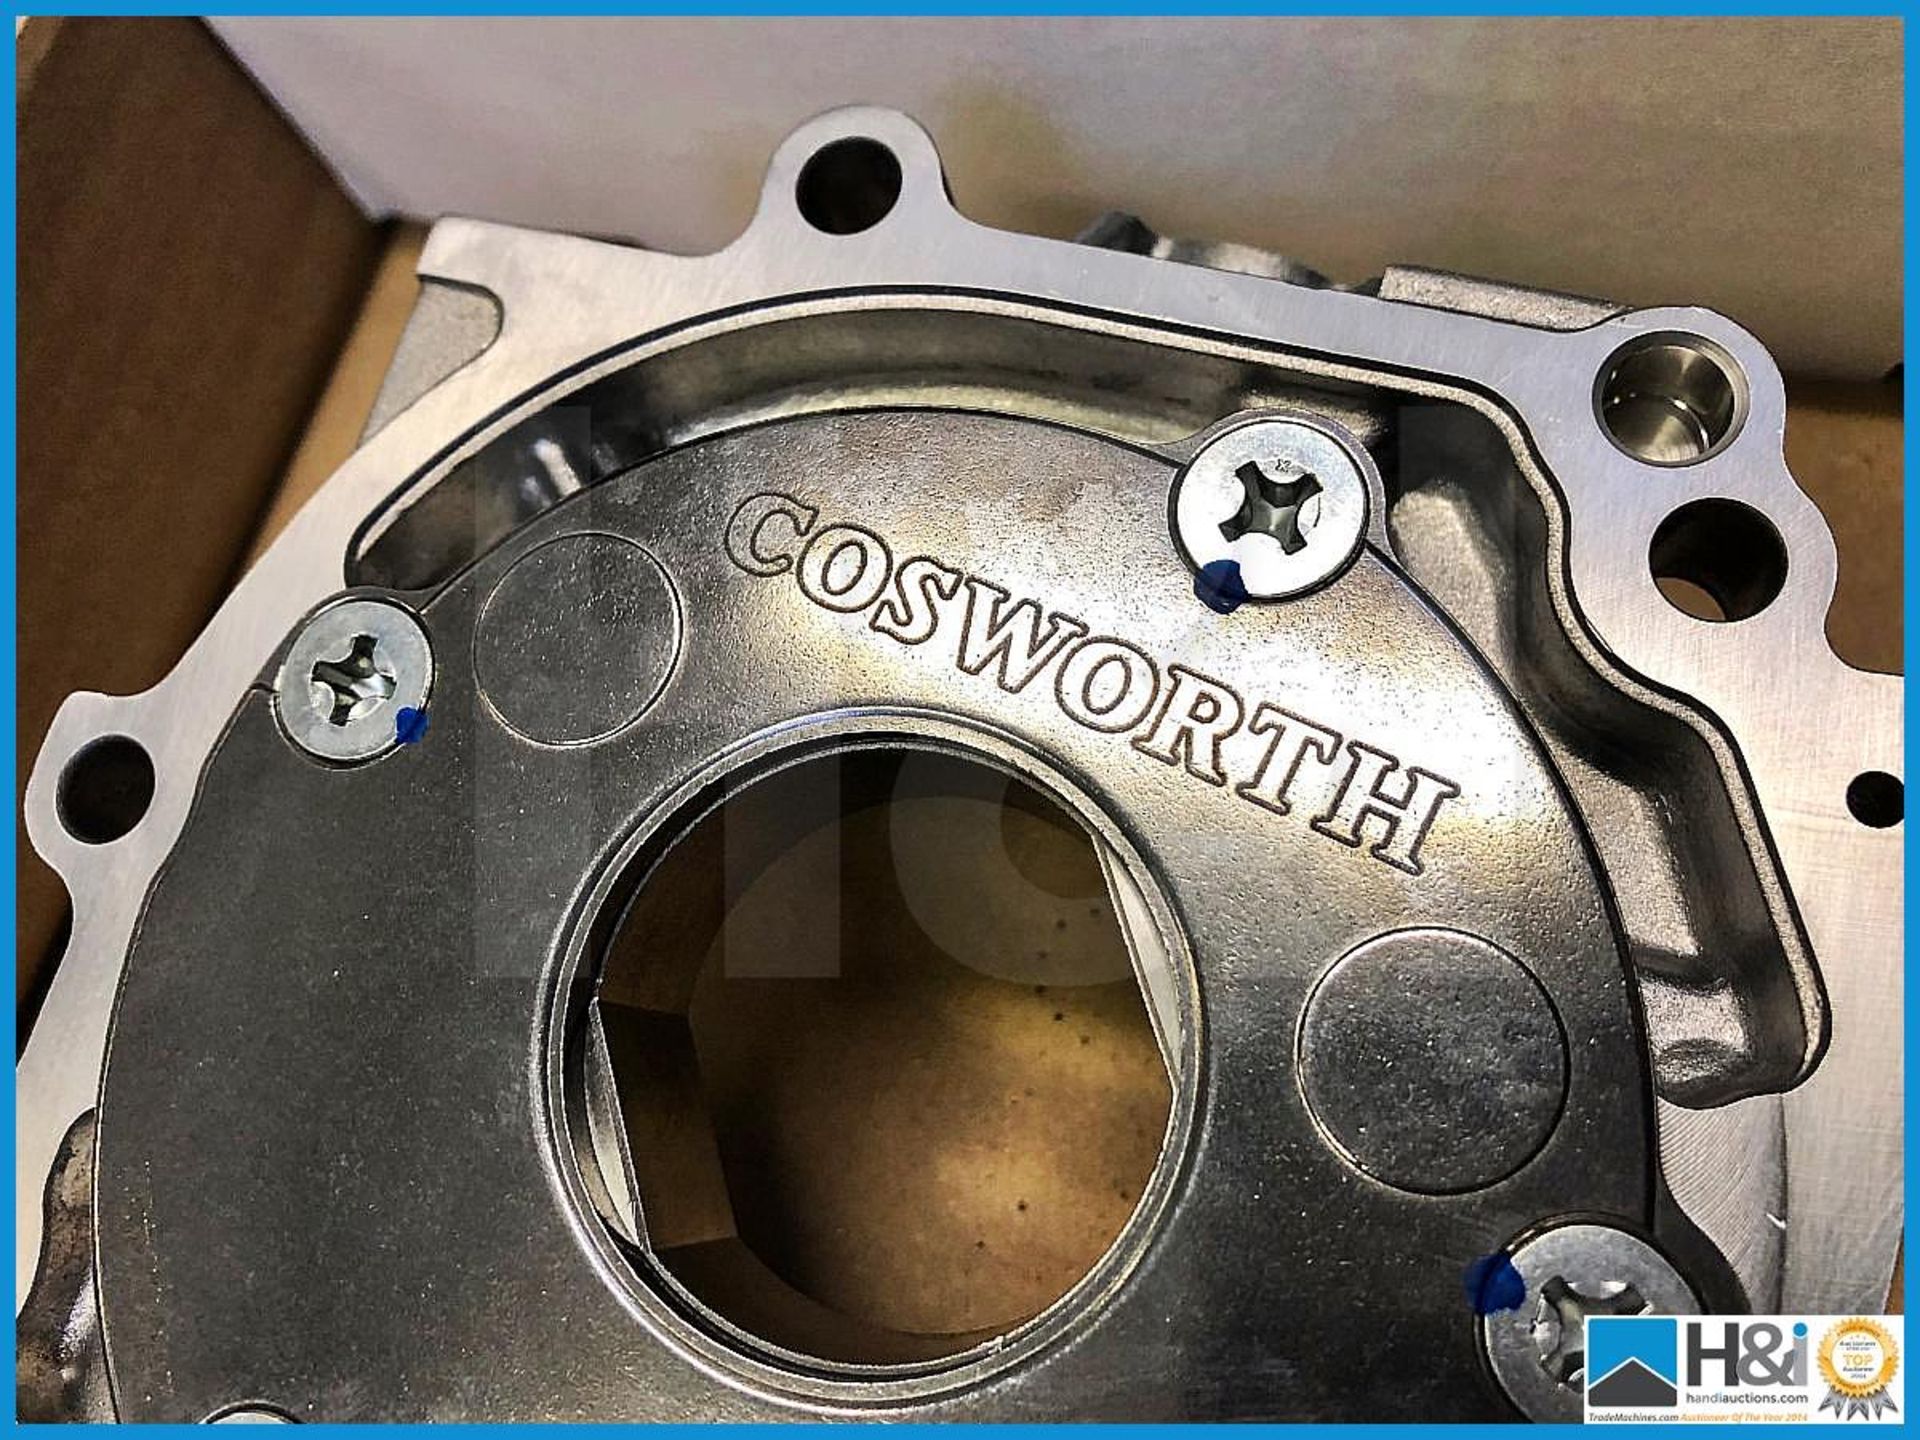 20 x Cosworth Oil Pump High Performance 12mm Gear. Code 20000432. Lot 56. RRP GBP 364 - Image 2 of 5